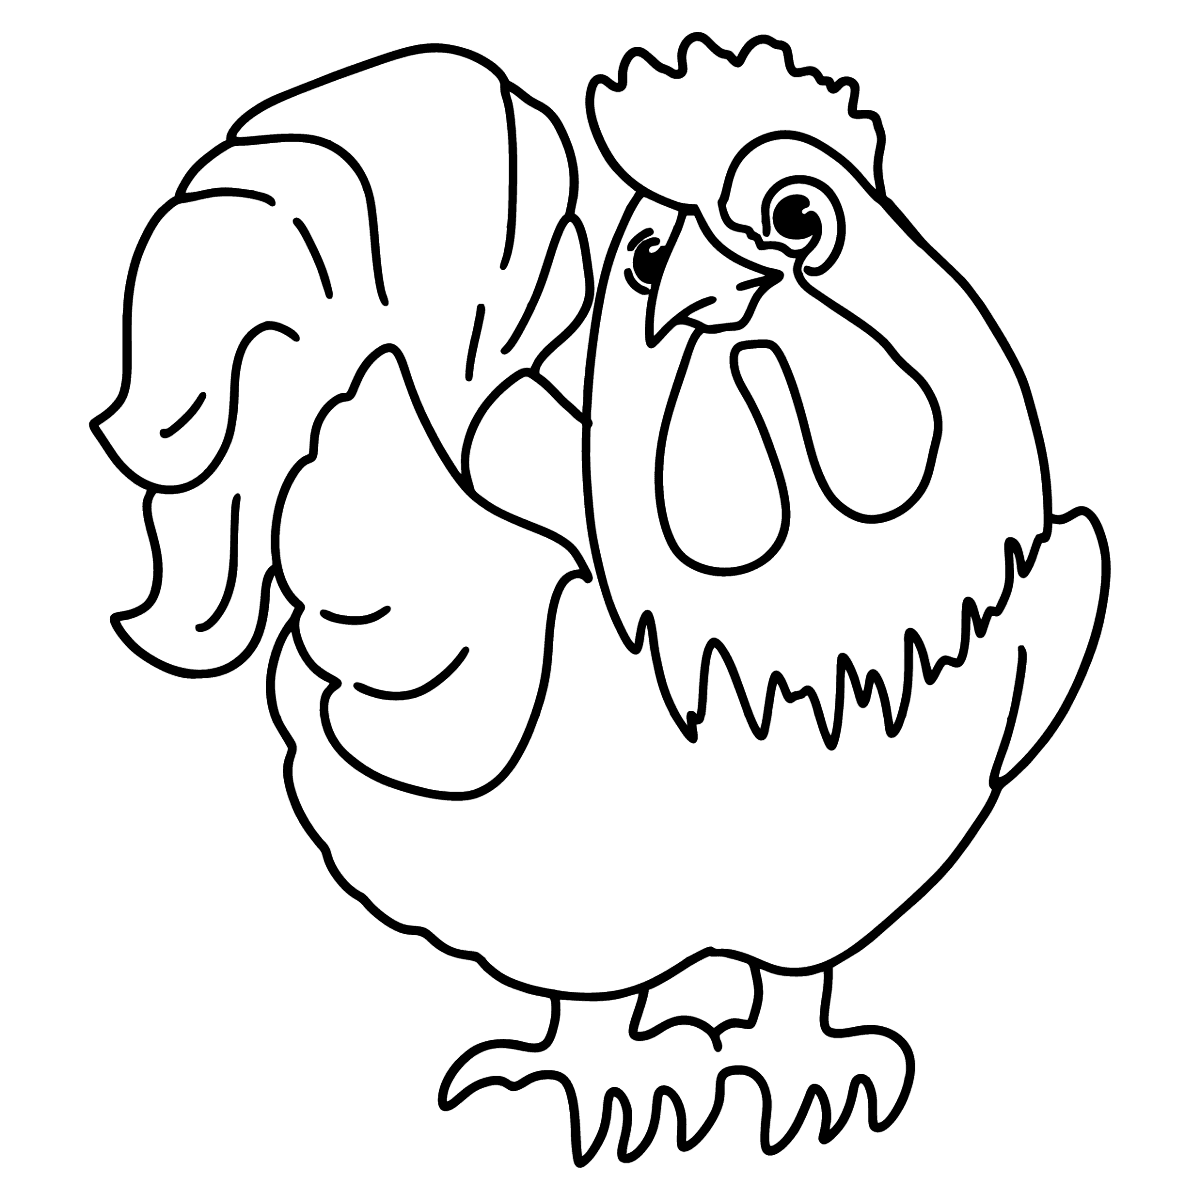 Rooster coloring page ♥ Online or Printable for Free!